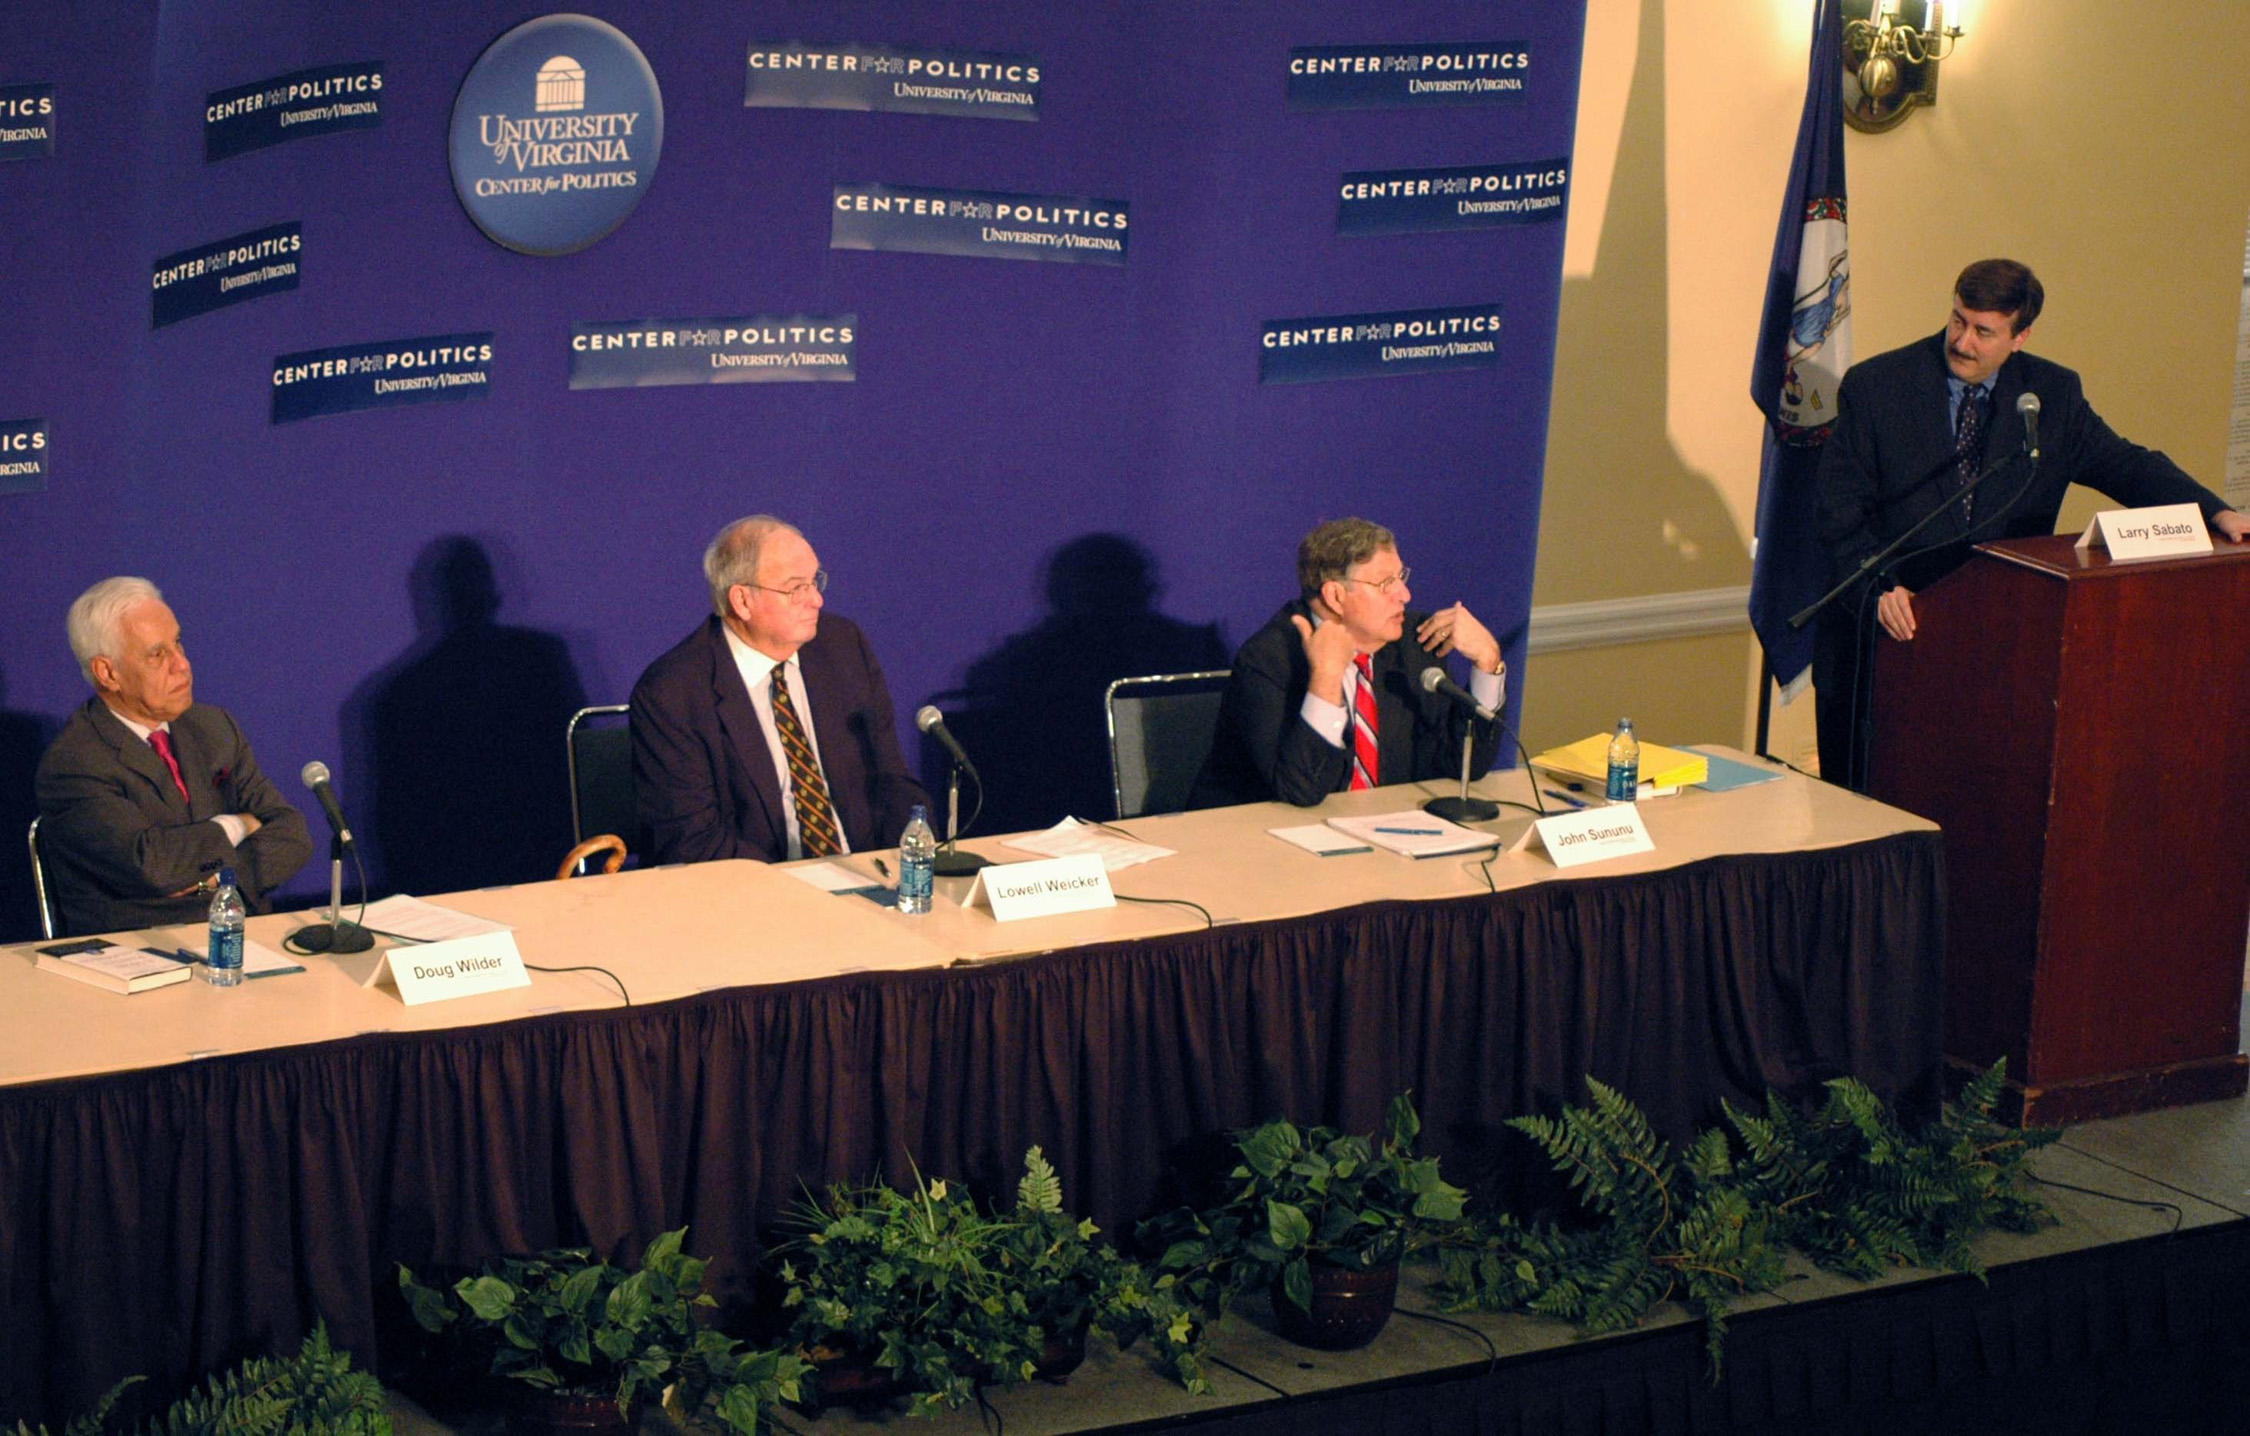 Panelists Left to right: Doug Wilder, Lowell Weicker and John Sununu, with Moderator Larry Sabato standing at a podium